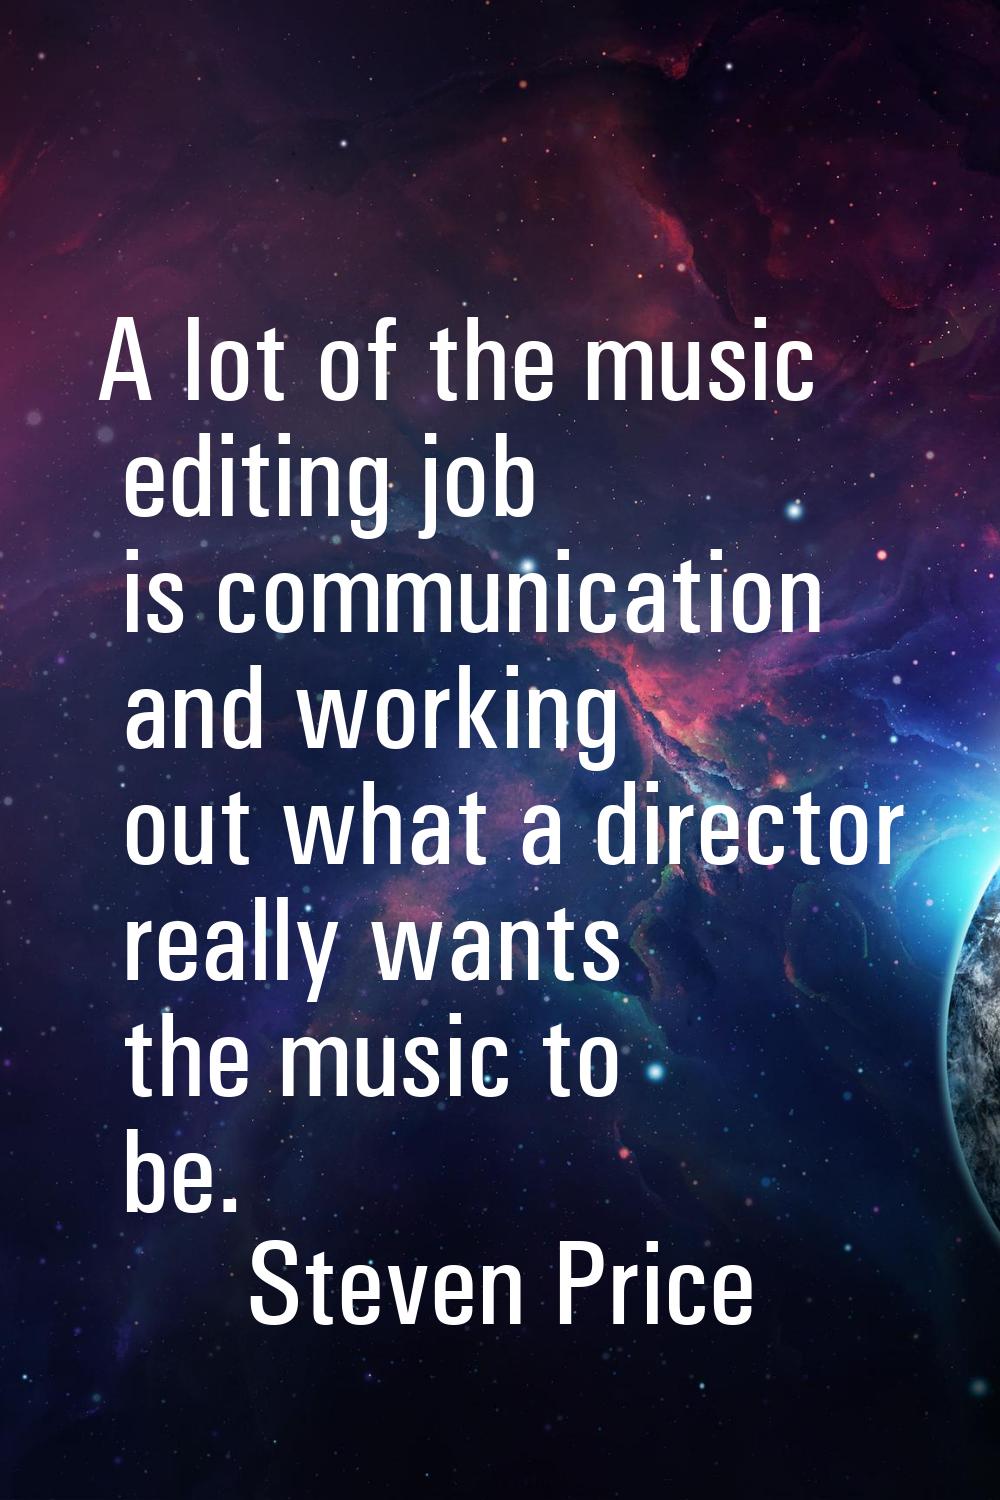 A lot of the music editing job is communication and working out what a director really wants the mu